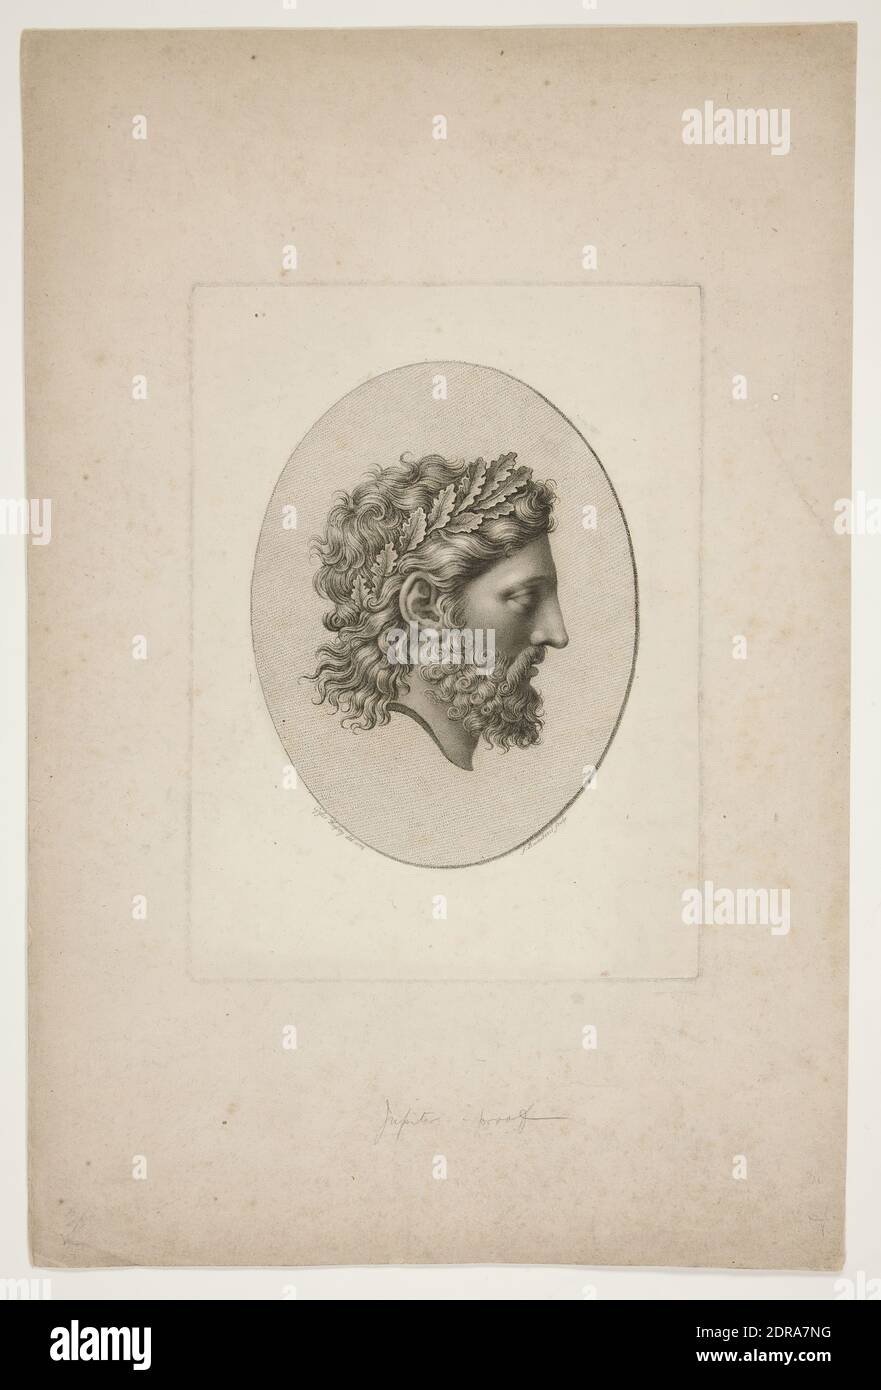 Engraver: Francesco Bartolozzi, Italian, 1727–1815, After: Giles Hussey, British, 1710–1788, Jupiter, Engraving (proof), platemark: 23.4 × 17.1 cm (9 3/16 × 6 3/4in.), Made in Italy, Italian, 18th century, Works on Paper - Prints Stock Photo